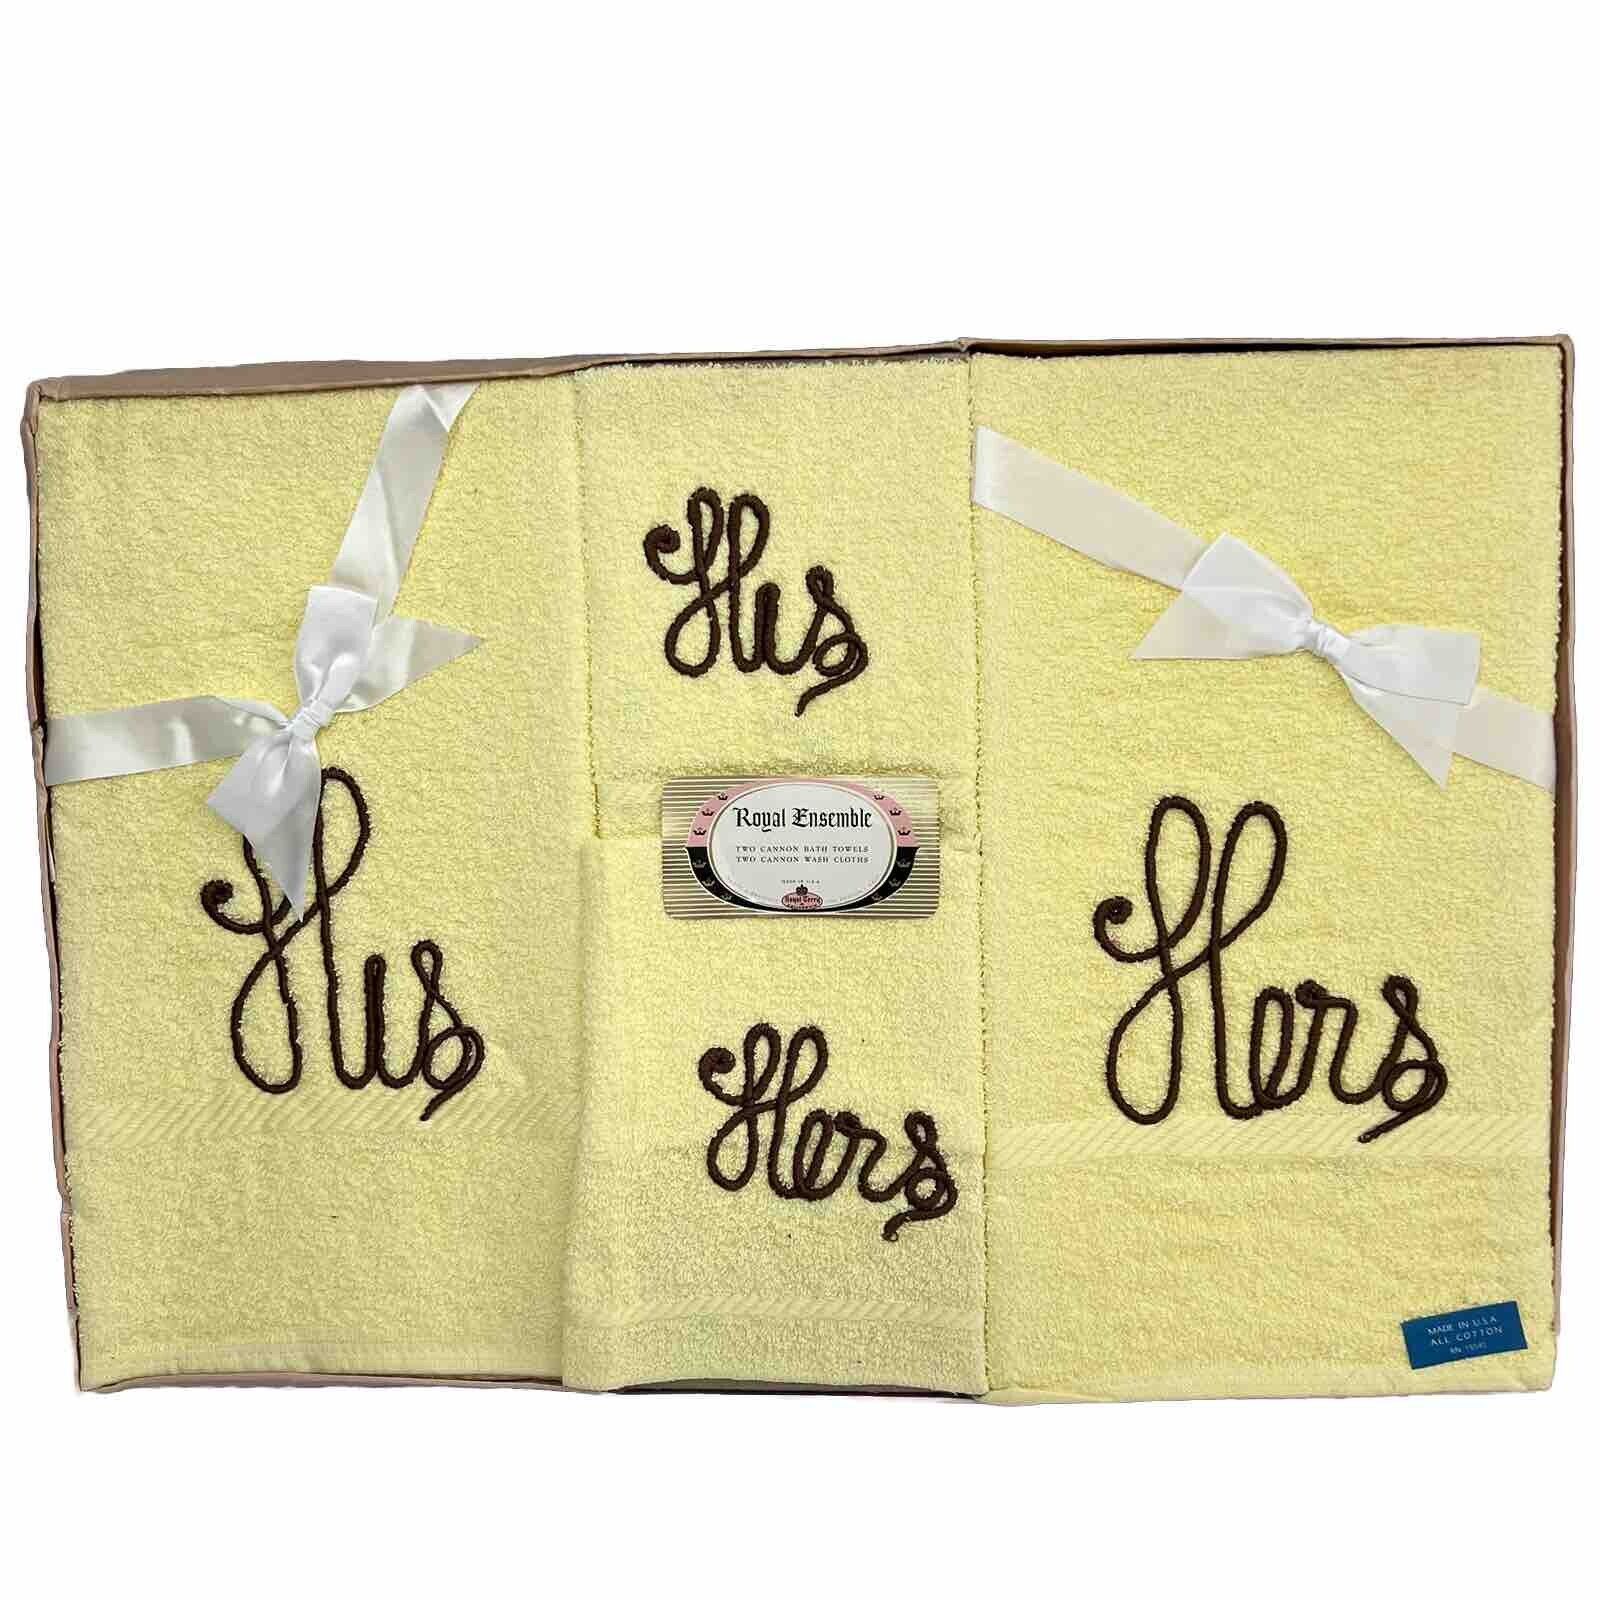 Vtg Royal Ensemble Terry Bathroom Towel Set Yellow Brown Embroidered His Hers